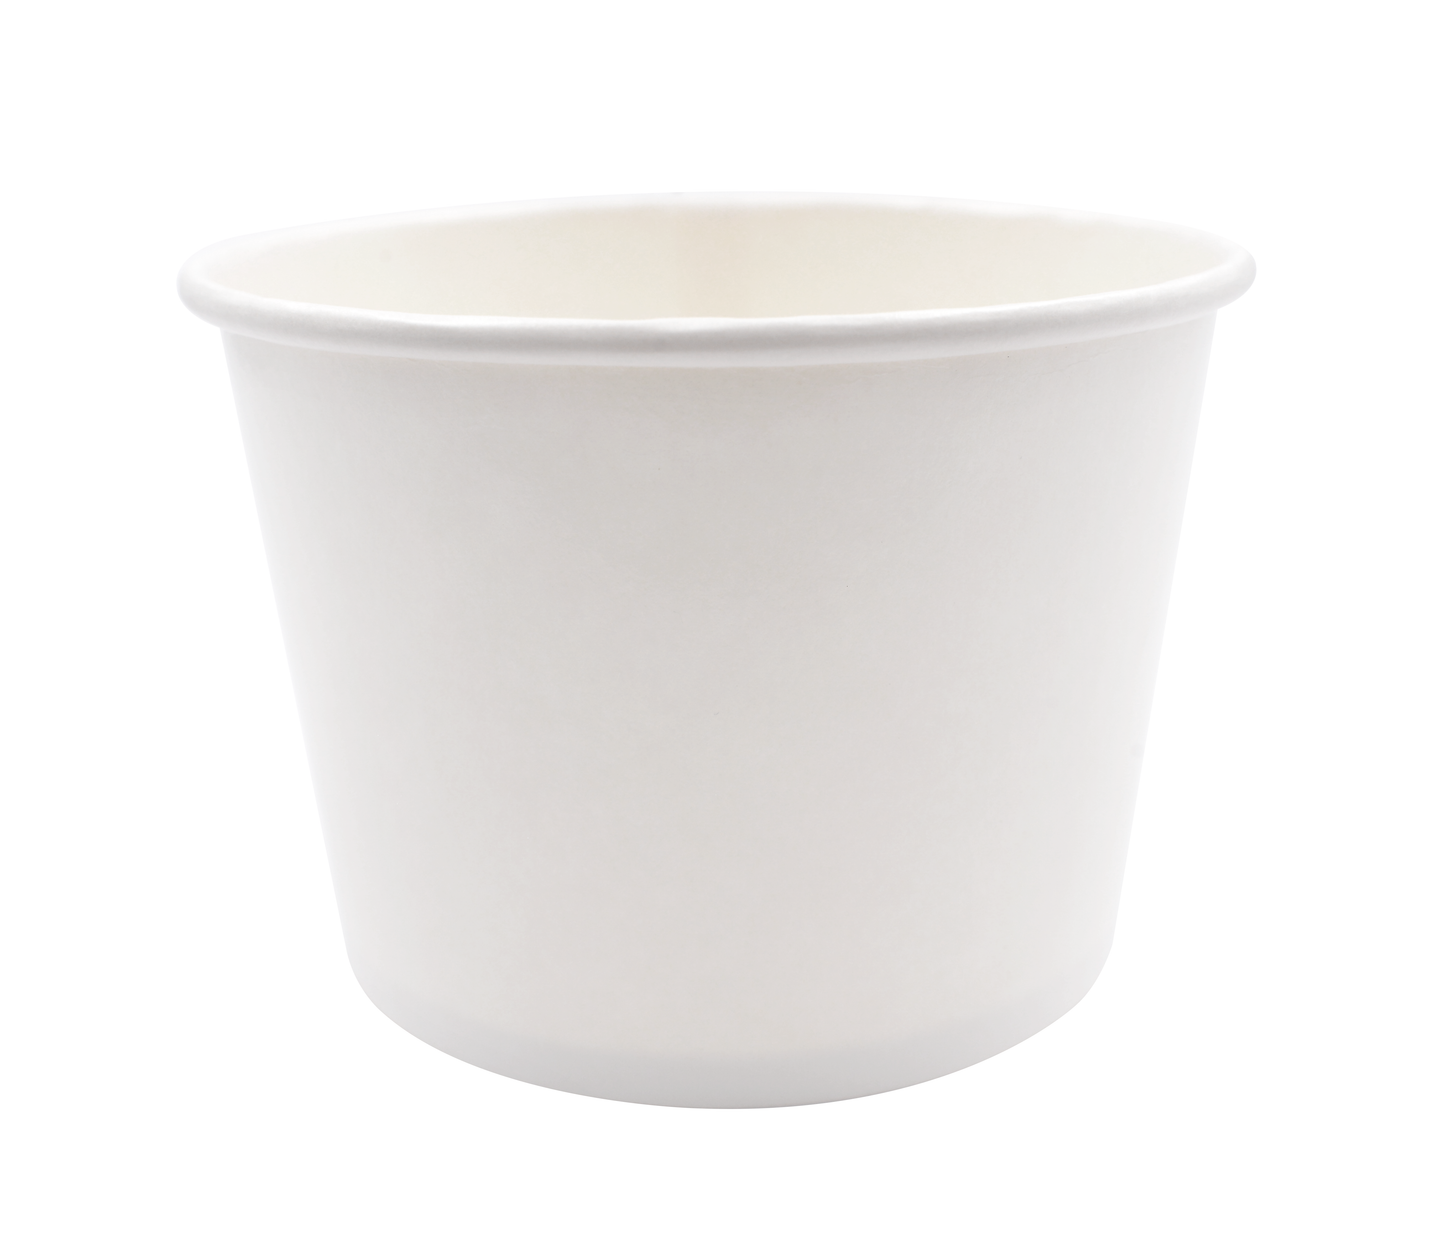 120-001-016 White Paper Soup/Food Container 16oz.